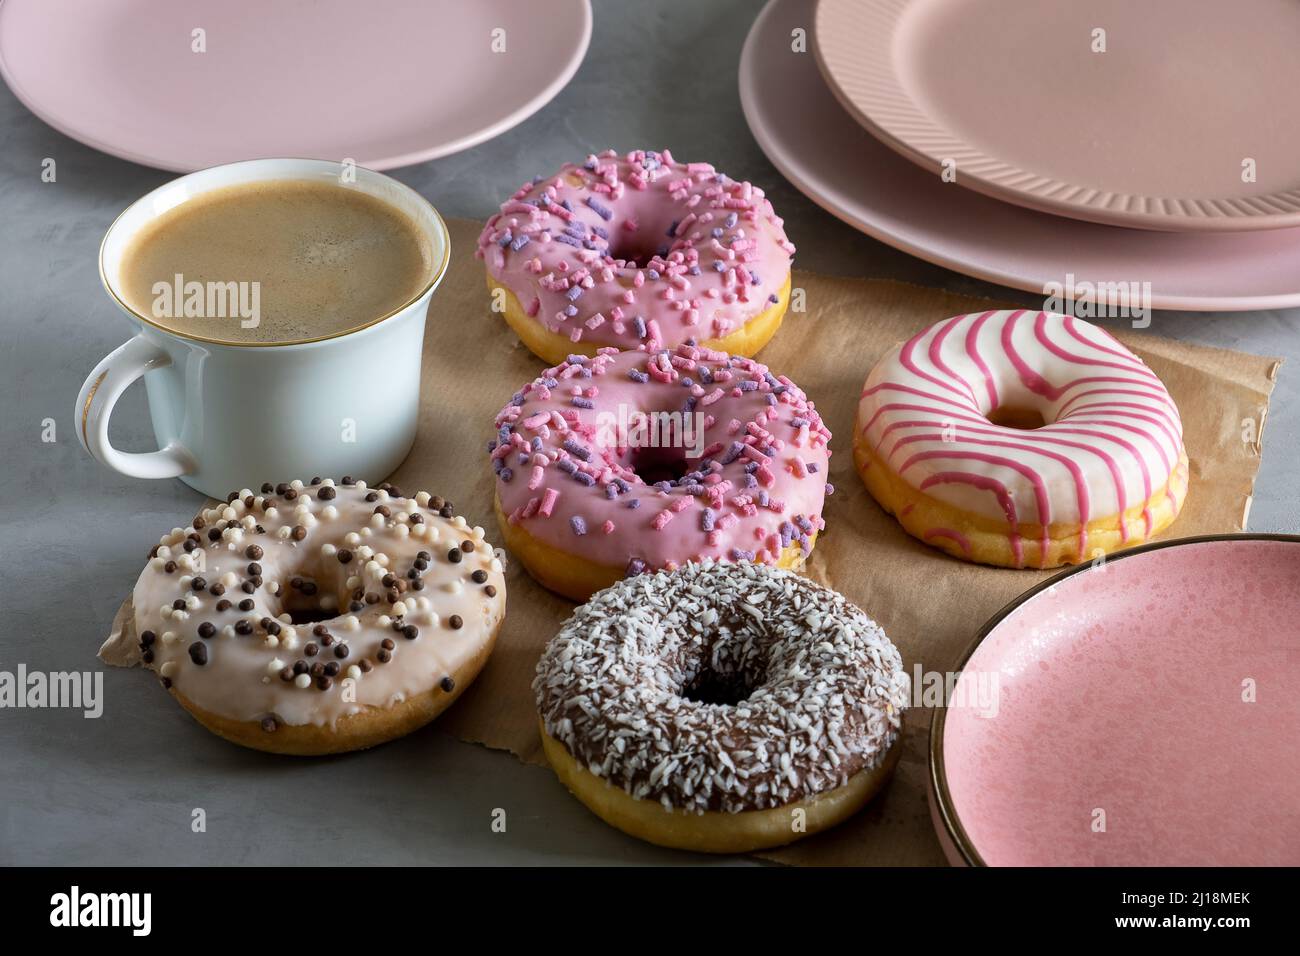 Several donuts lie on craft parchment paper on gray surface Stock Photo